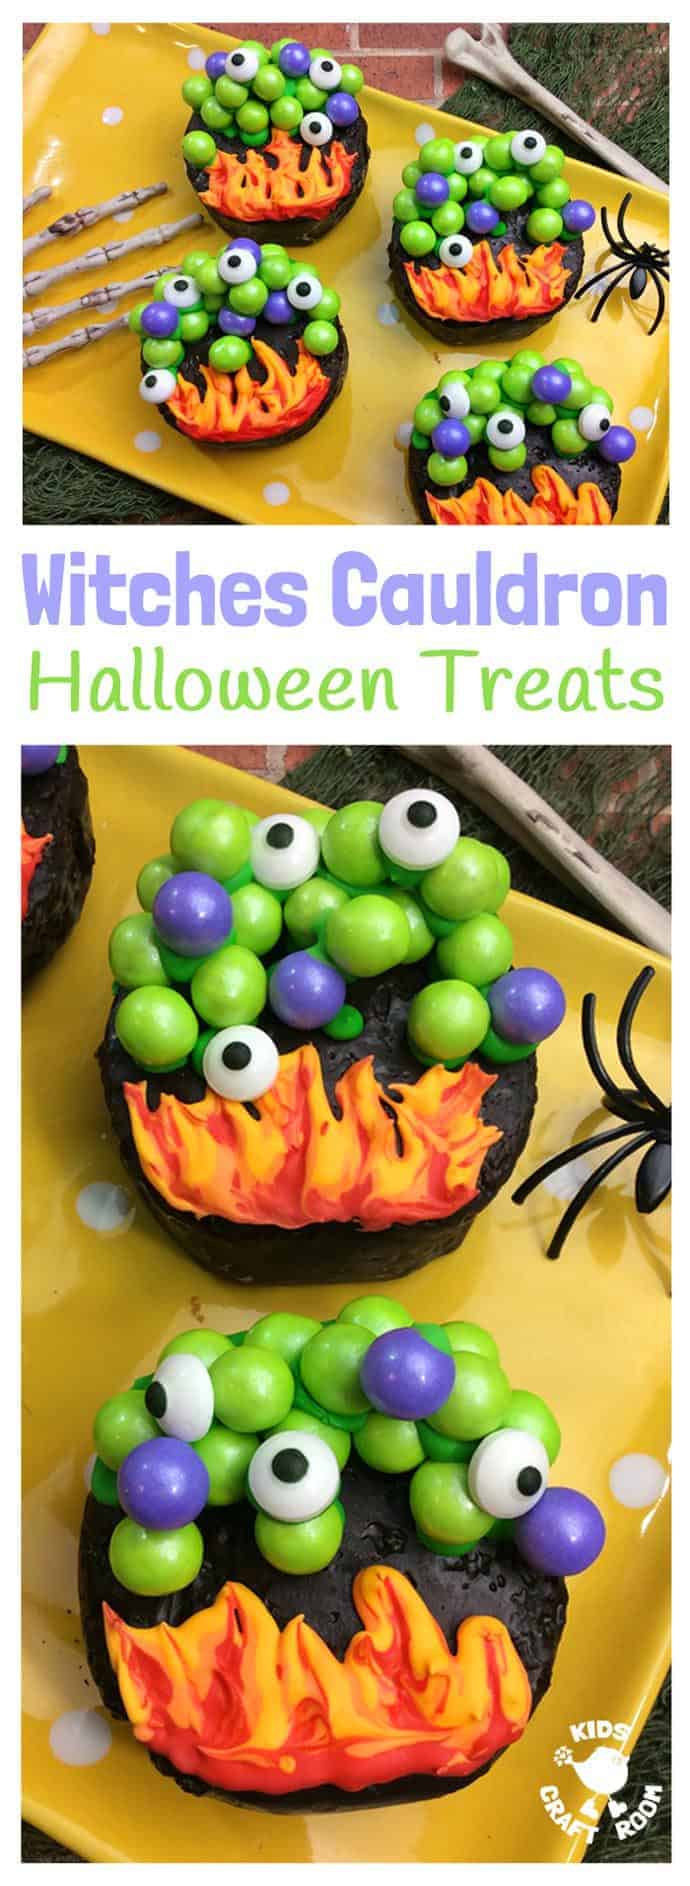 WITCHES CAULDRON HALLOWEEN TREATS will cast a delicious spell at your Halloween party! A tasty Halloween food and craft fusion everyone will like to make, eat and share. Cauldrons filled with bubbling witches potion and topped up with eyes of frog are fun spooky treats that will bewitch the whole family!